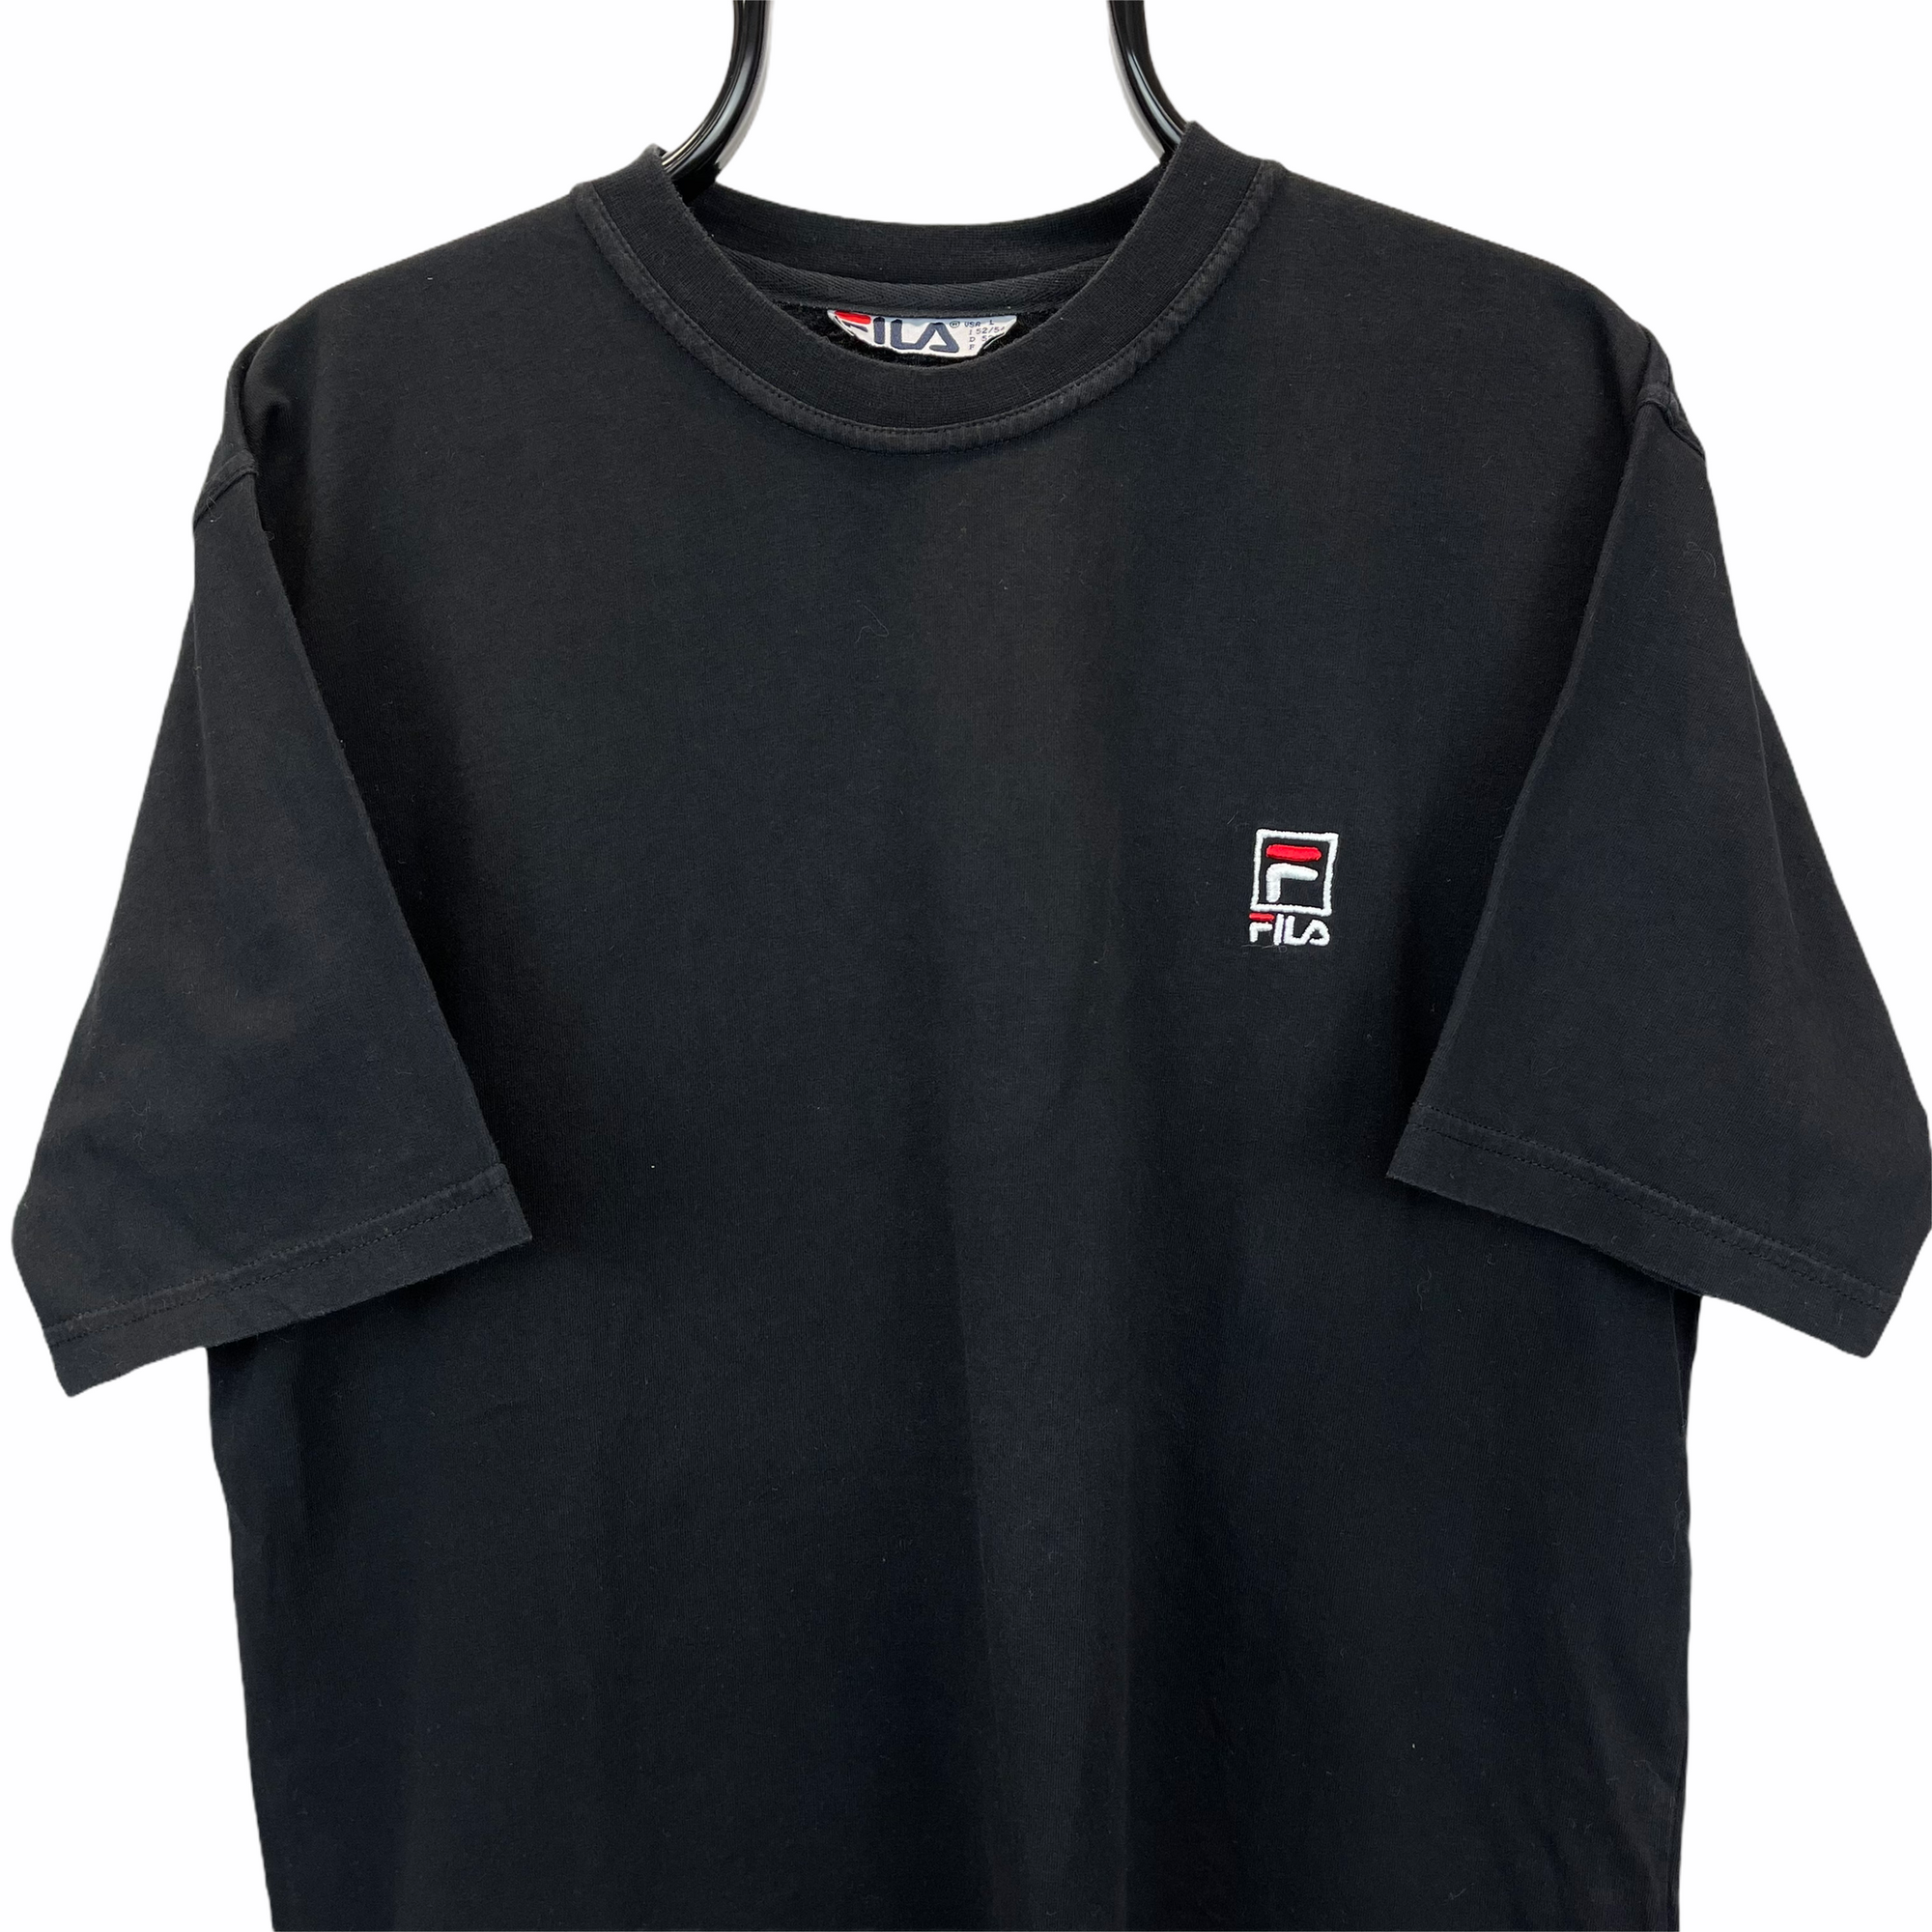 VINTAGE 90S FILA EMBROIDERED SMALL LOGO TEE IN BLACK - MEN'S LARGE/WOMEN'S XL